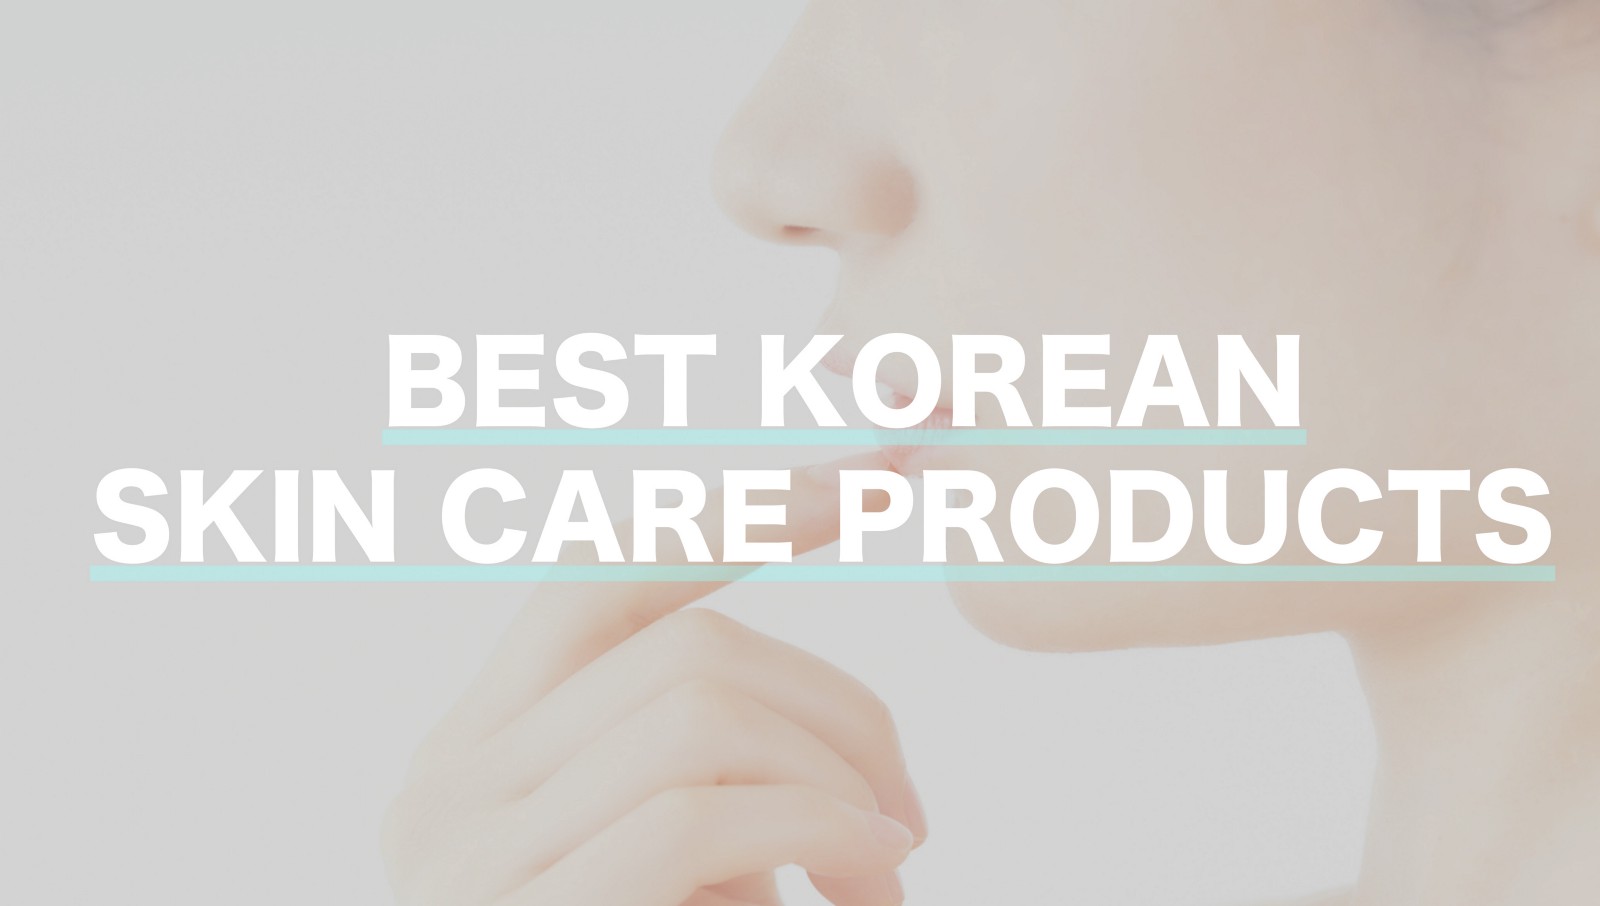 Best Korean Skin Care Products 2019